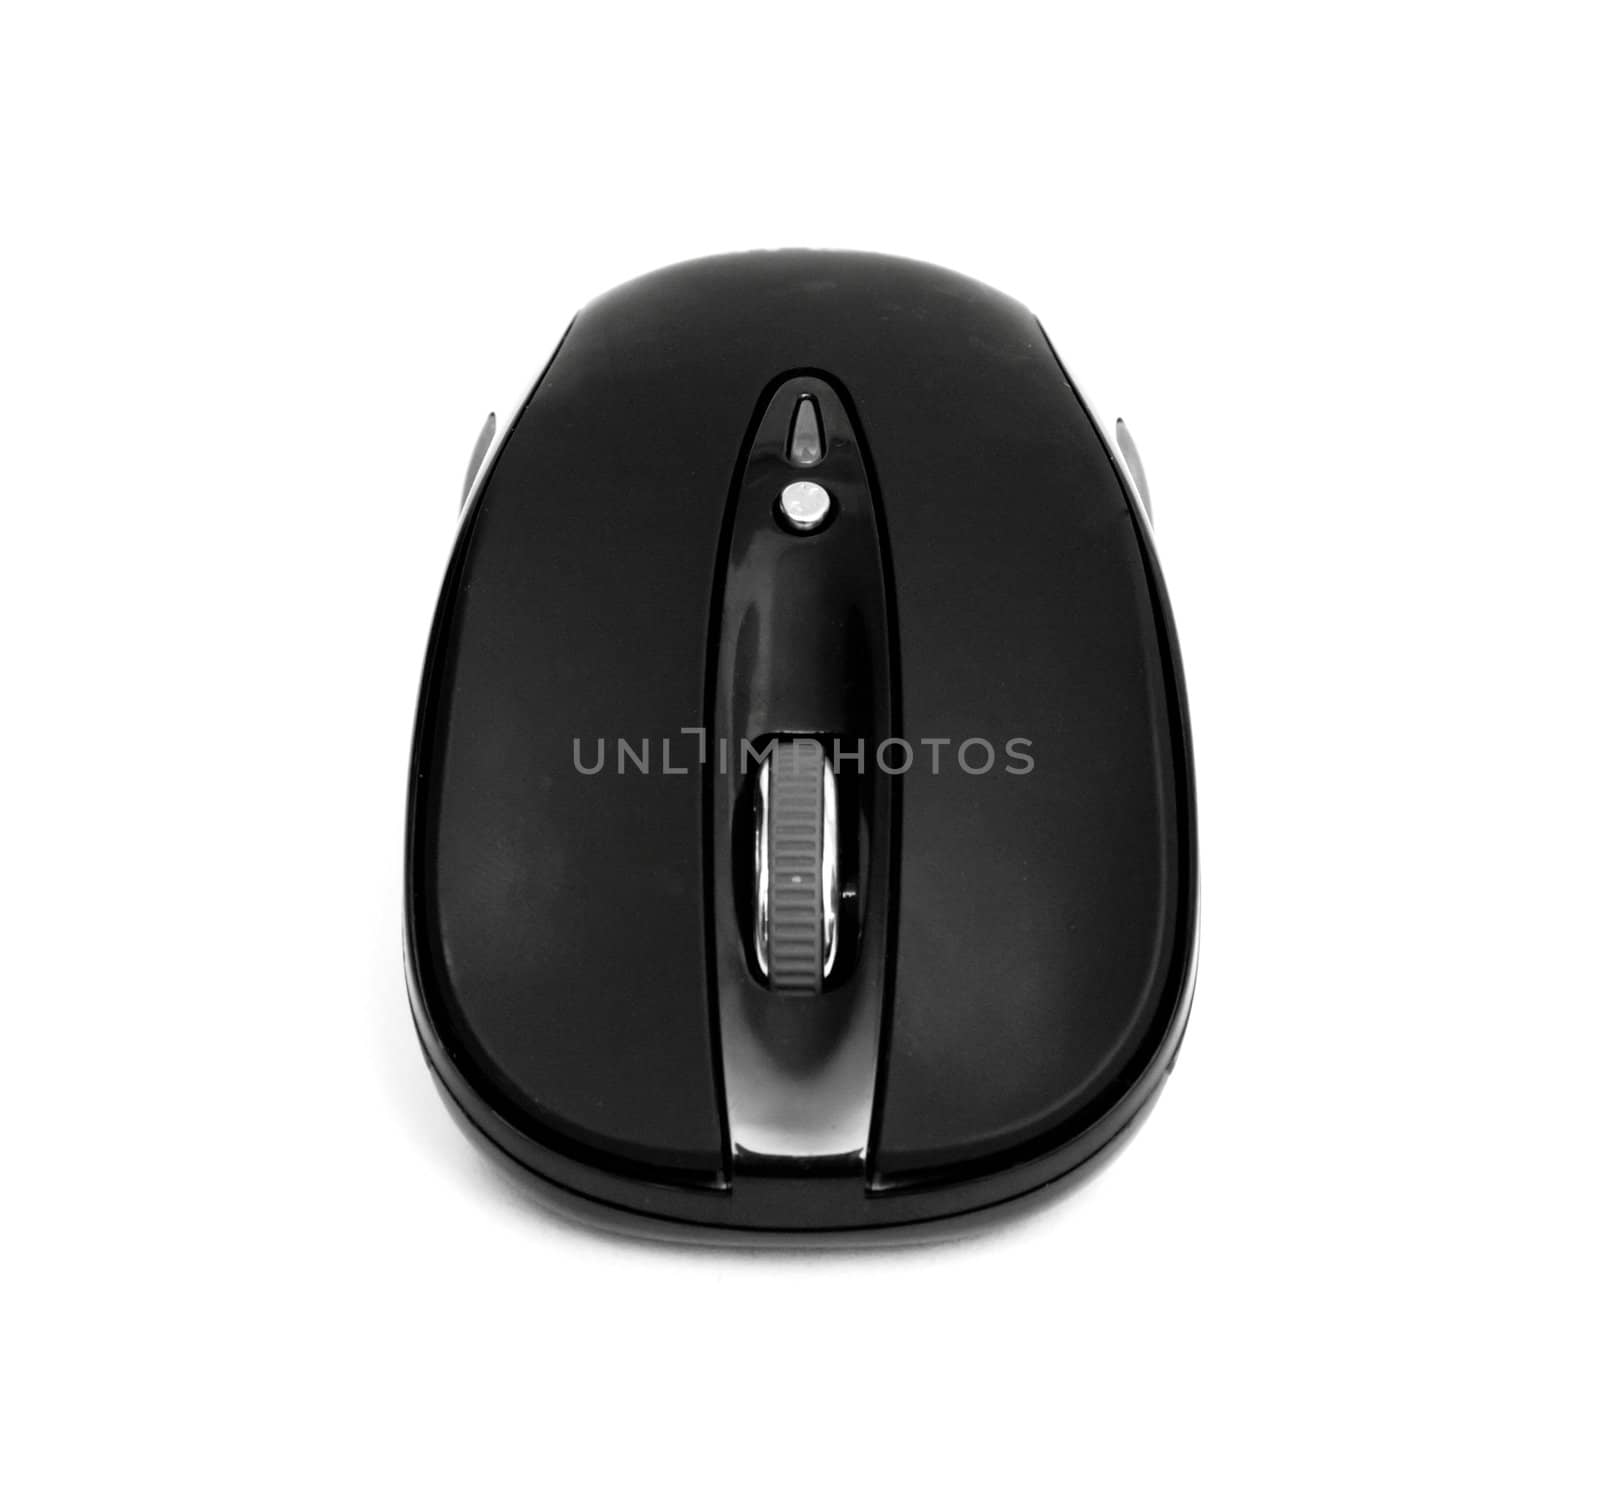 mouse from the computer